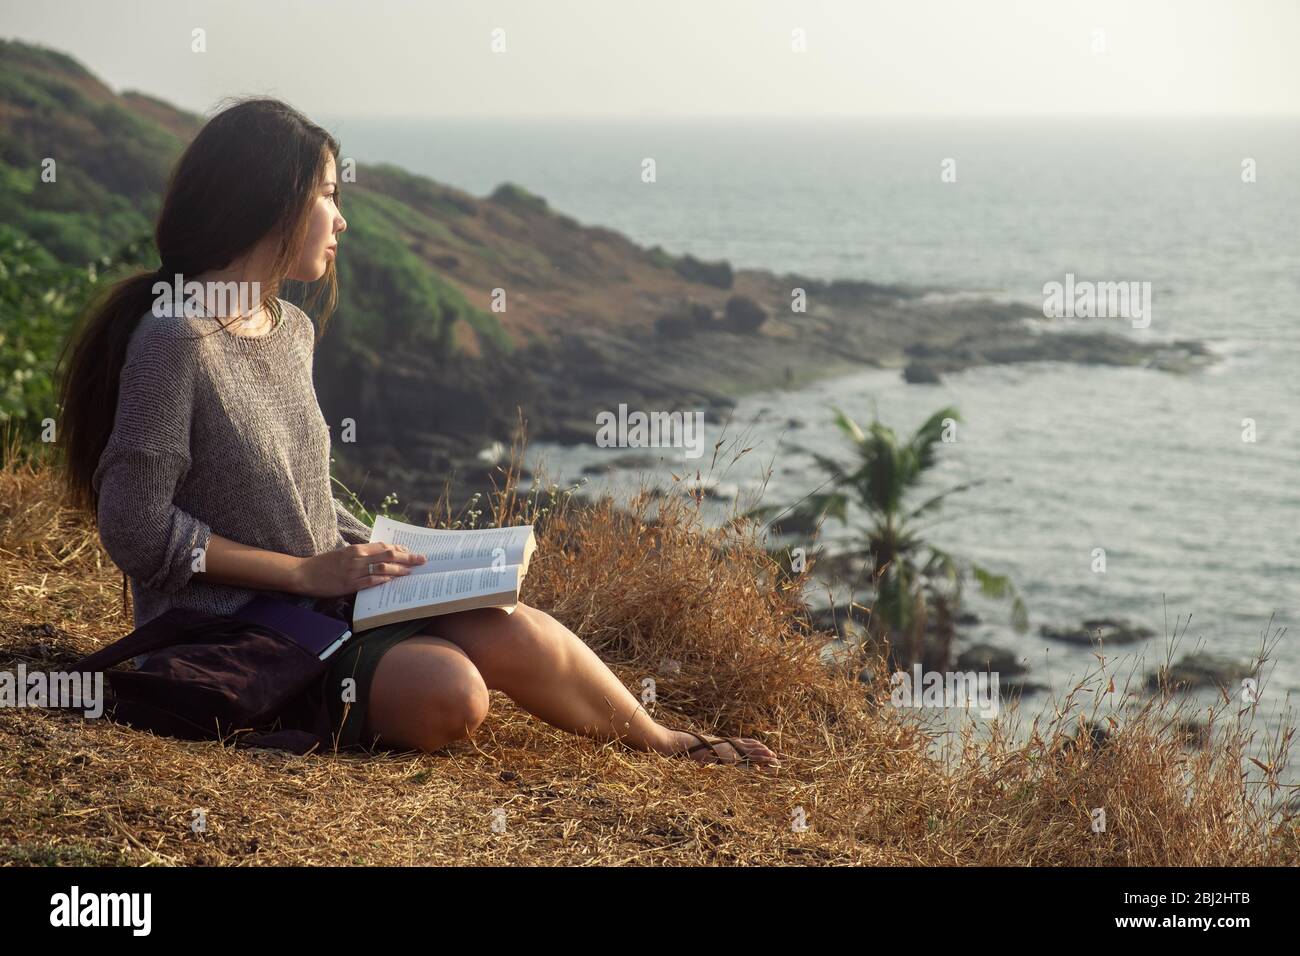 Young Woman Reading Book While Sitting Outdoors, close-up view Stock Photo